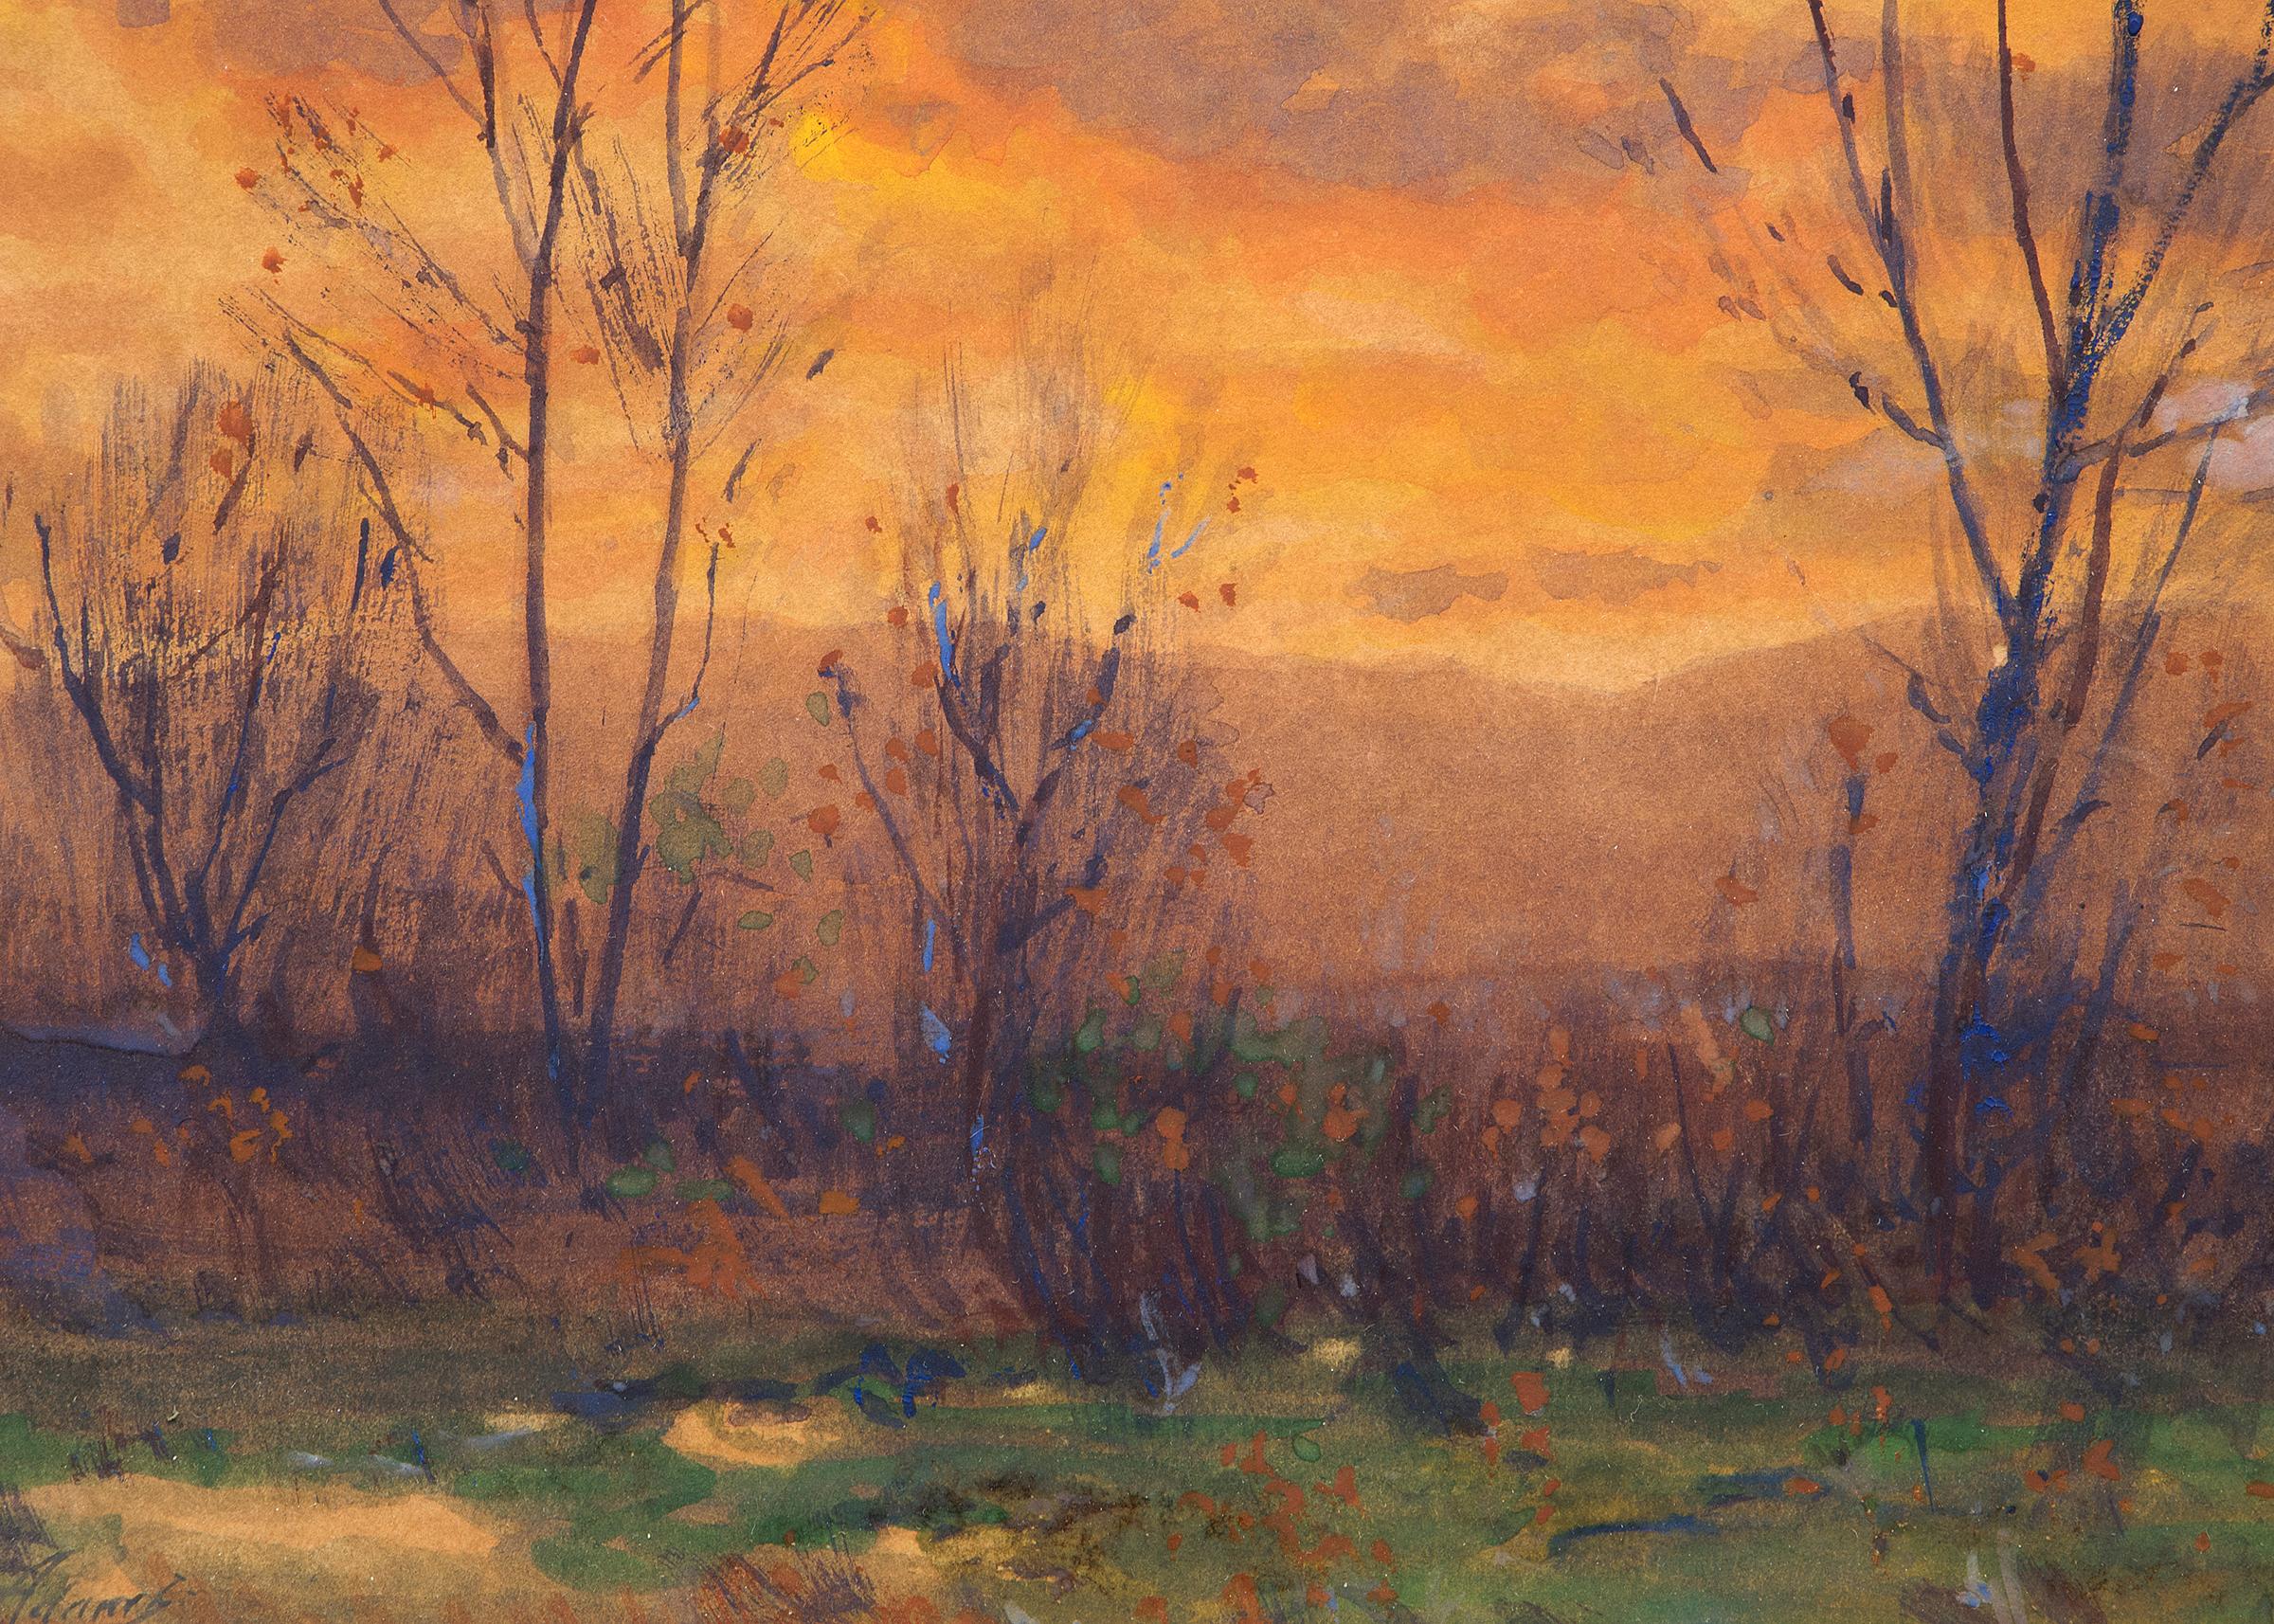 Original signed framed vintage landscape painting by Charles Partridge Adams (1858-1942) of a Sunset along the Front Range of Colorado (near Denver) with bare trees, a creek and prairie in the foreground and the Rocky Mountains in the background in